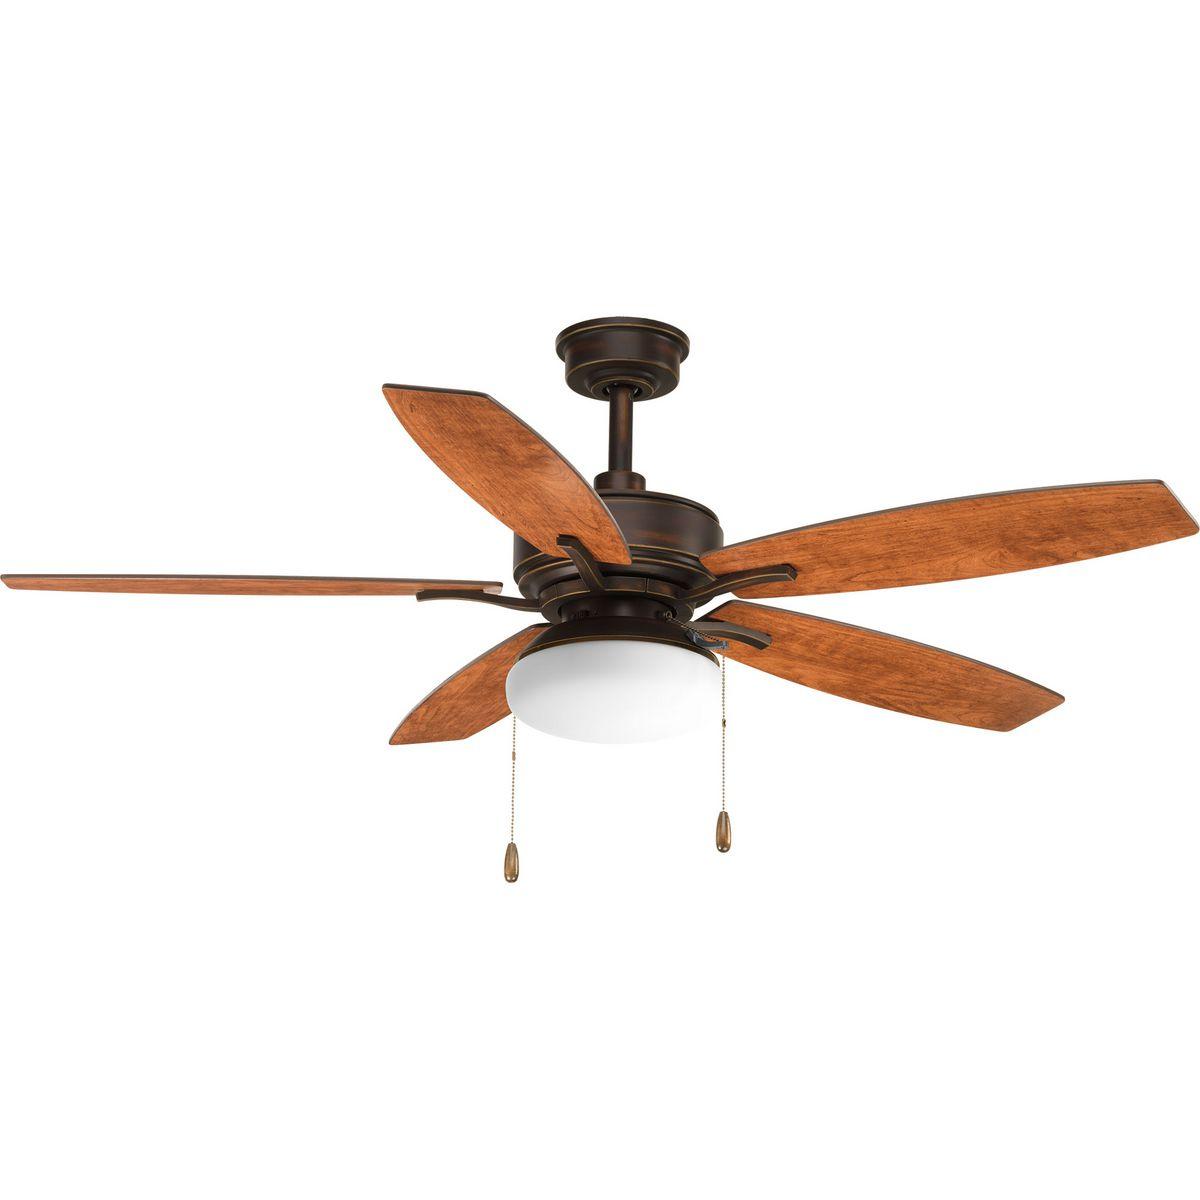 Hubbell P2552-20 The 52 inch Billows ceiling fan features an LED light kit with white opal glass shade and five reversible blades in cherry and antique walnut. With a sophisticated and traditional design, the Billows offers both form and function with two energy efficient